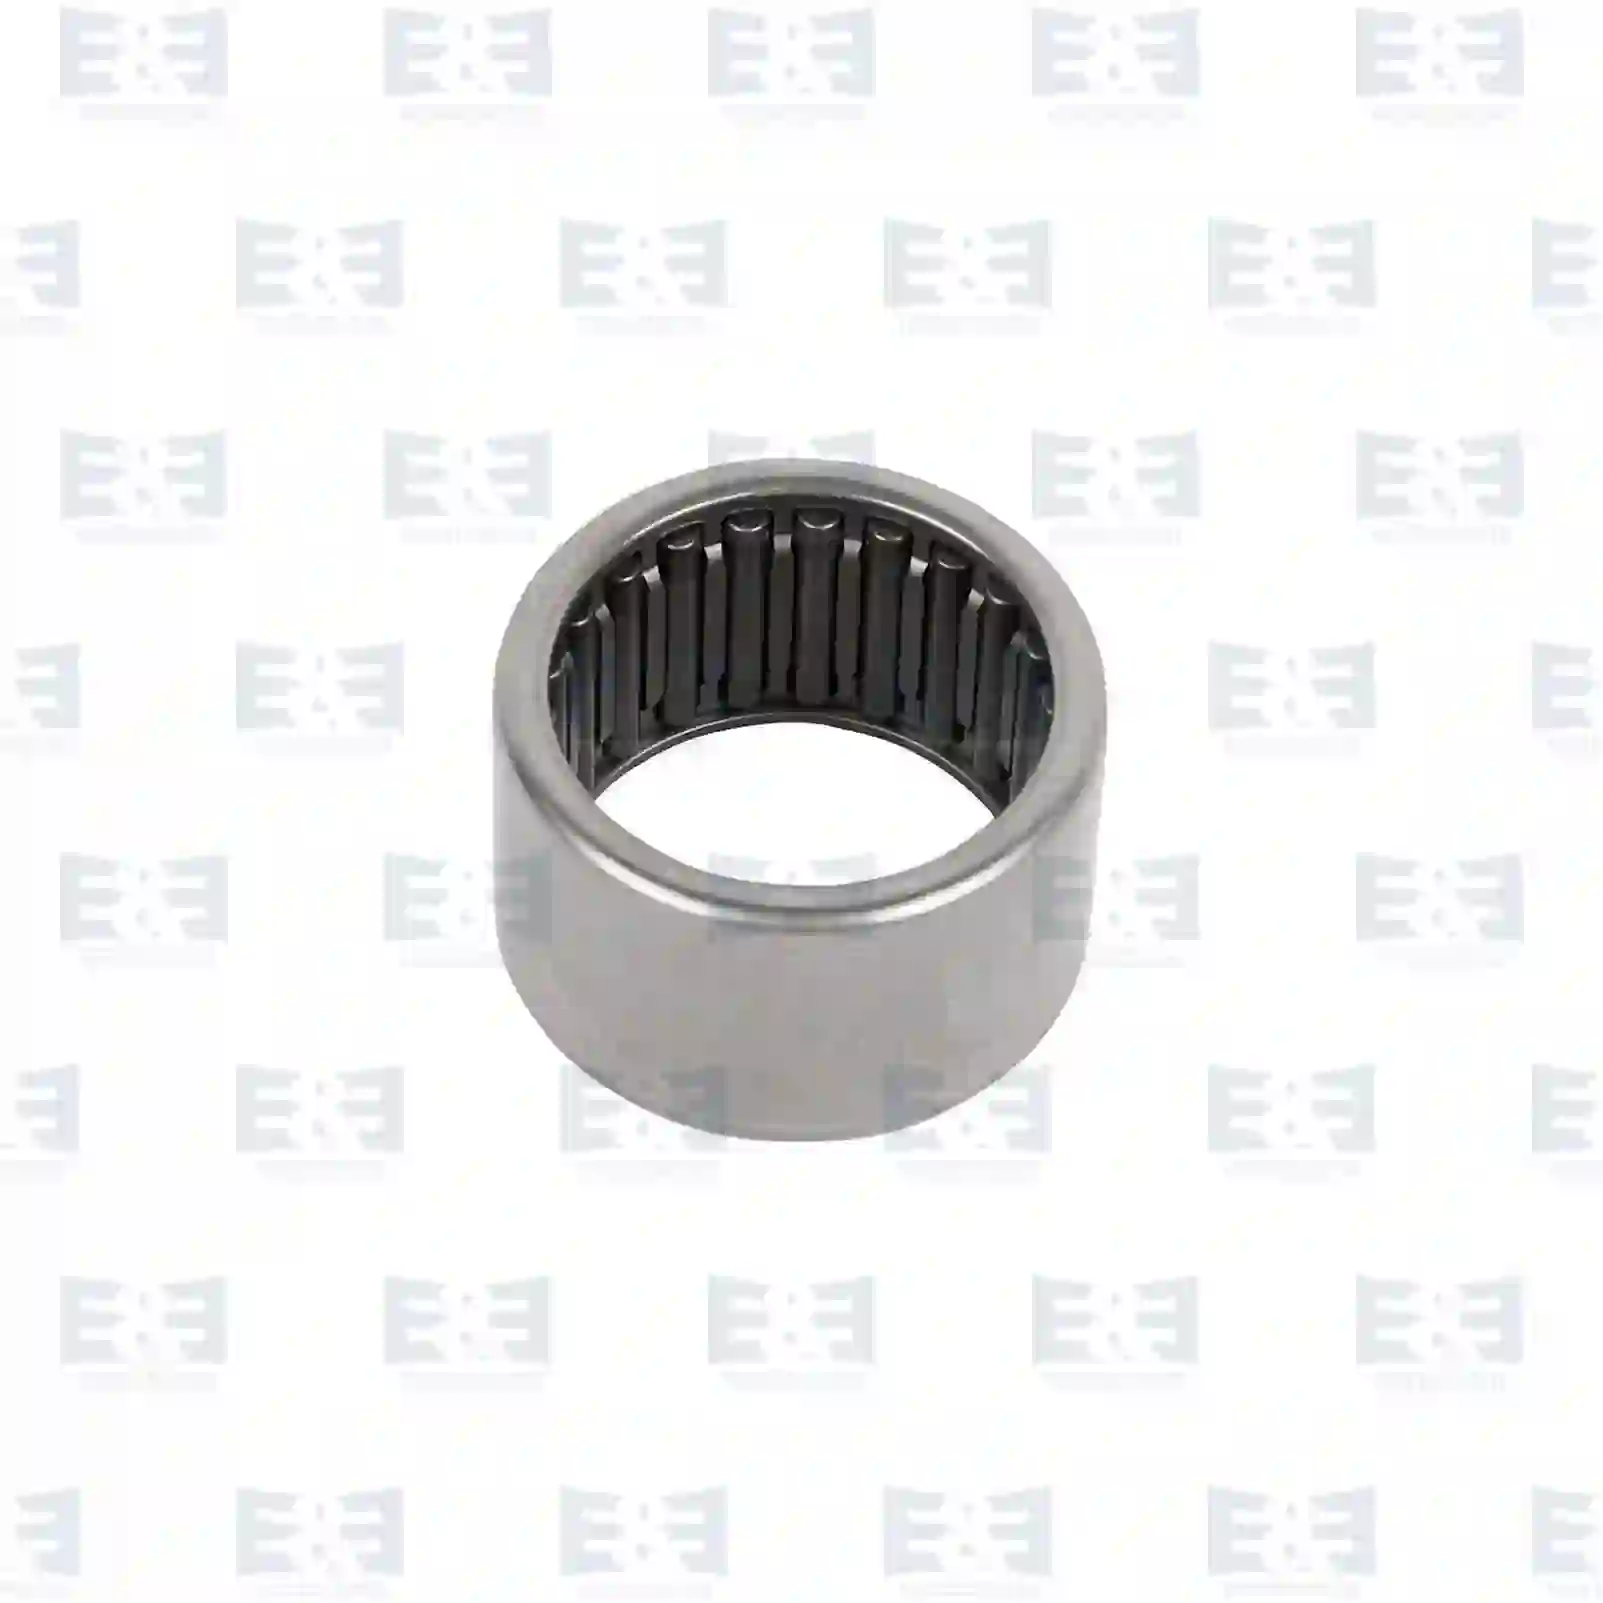 Gear Shift Housing Needle bearing, EE No 2E2279464 ,  oem no:X636048500000, 059103869, 332532, X636048500000, 09923939, 43295-24300, 00168731, 43295-24300, 06337190009, 0059813110, 385355, 181282, 059103869, ZG02565-0008 E&E Truck Spare Parts | Truck Spare Parts, Auotomotive Spare Parts